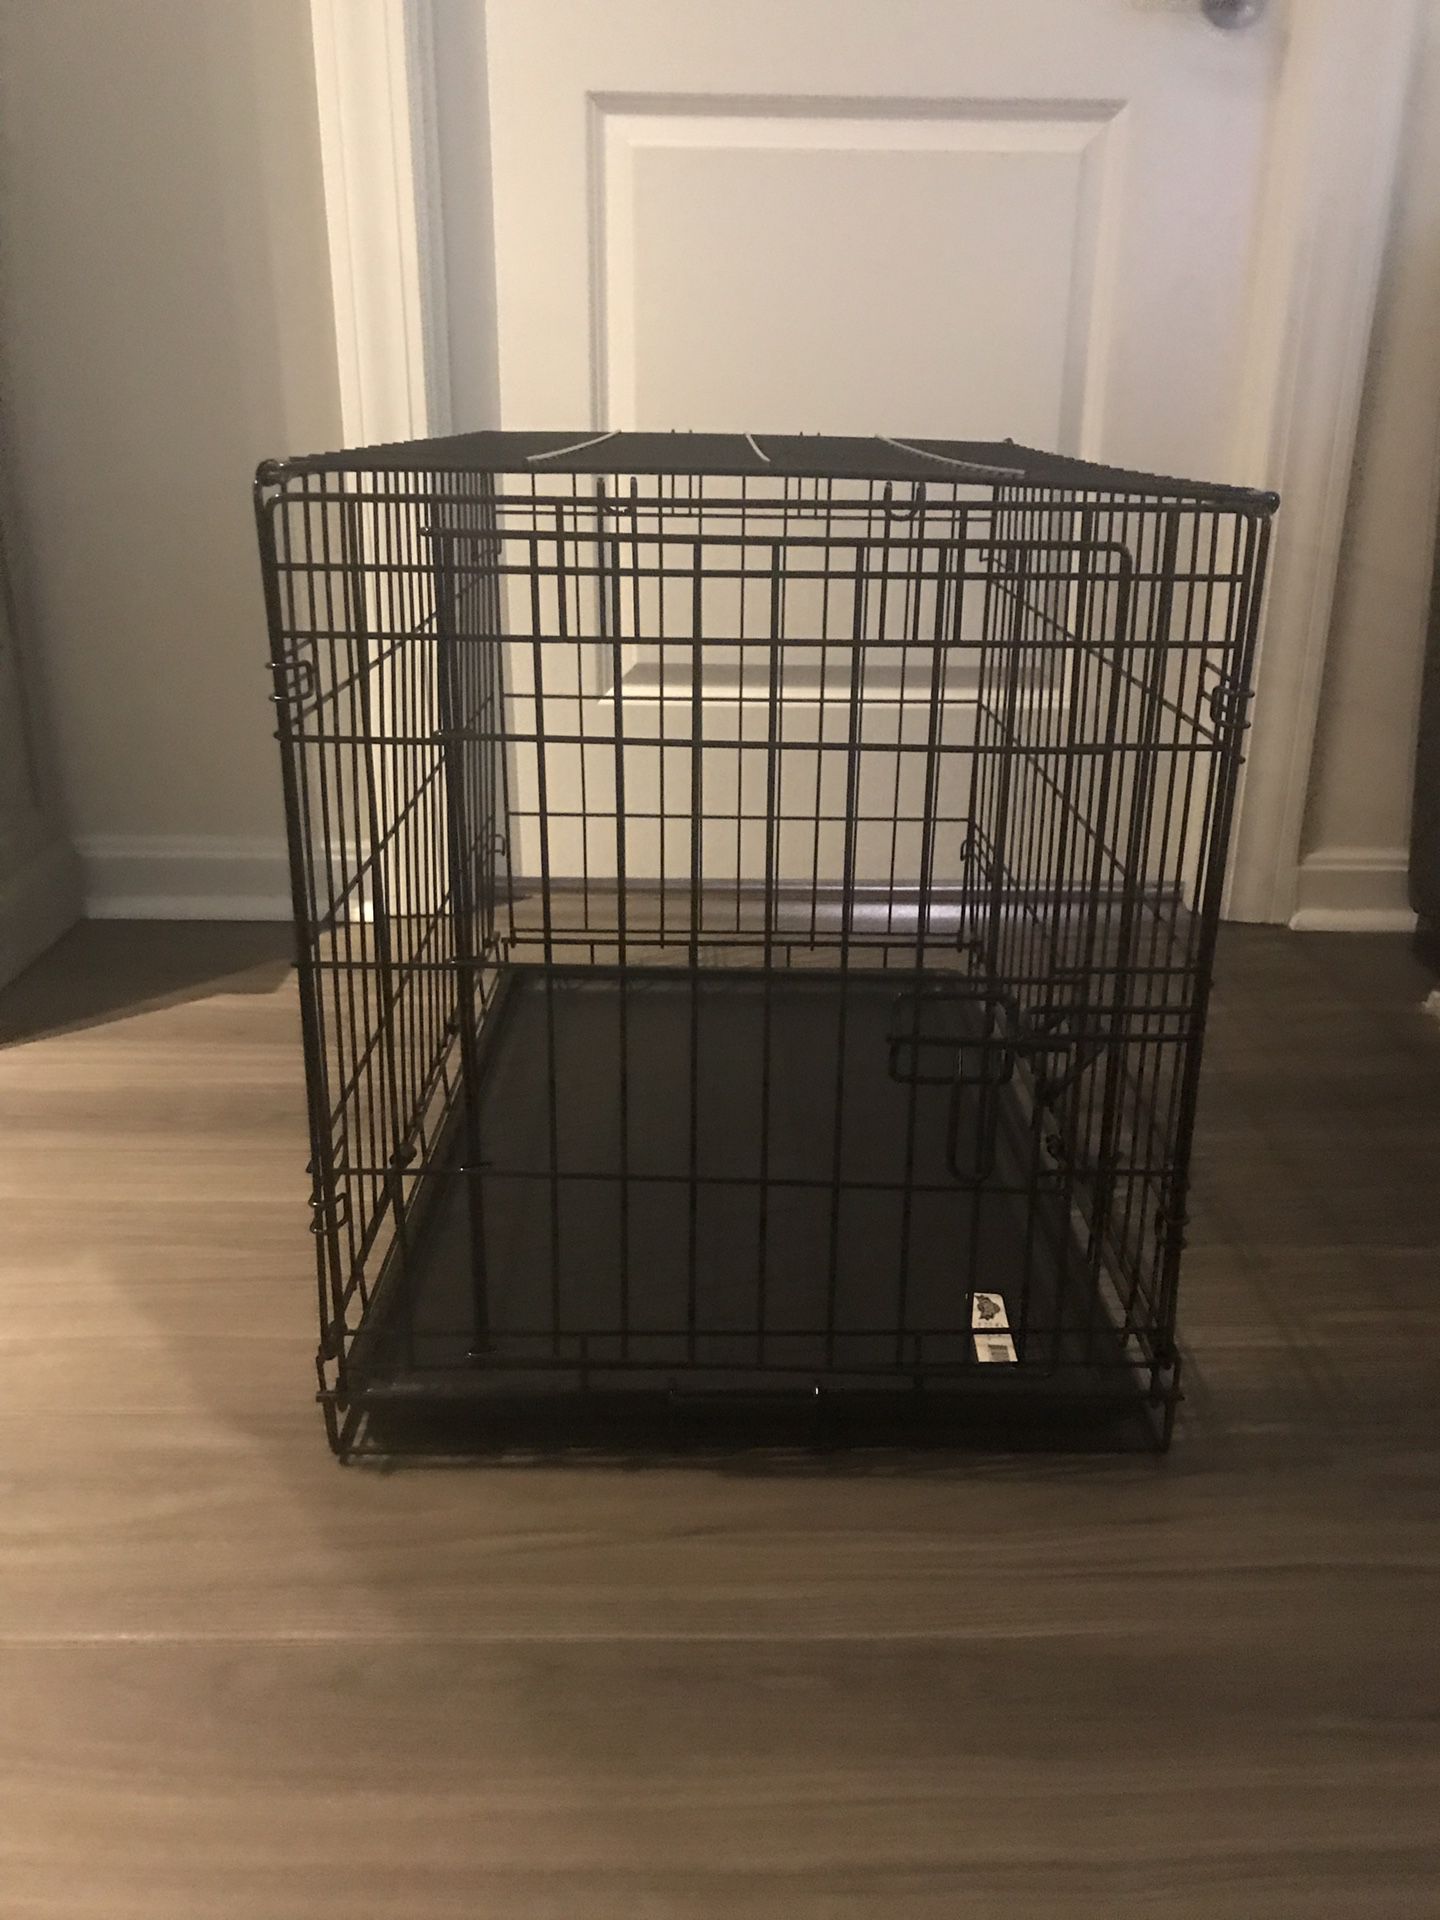 Very Gently Used Medium Dog Crate with Plush Crate Pad